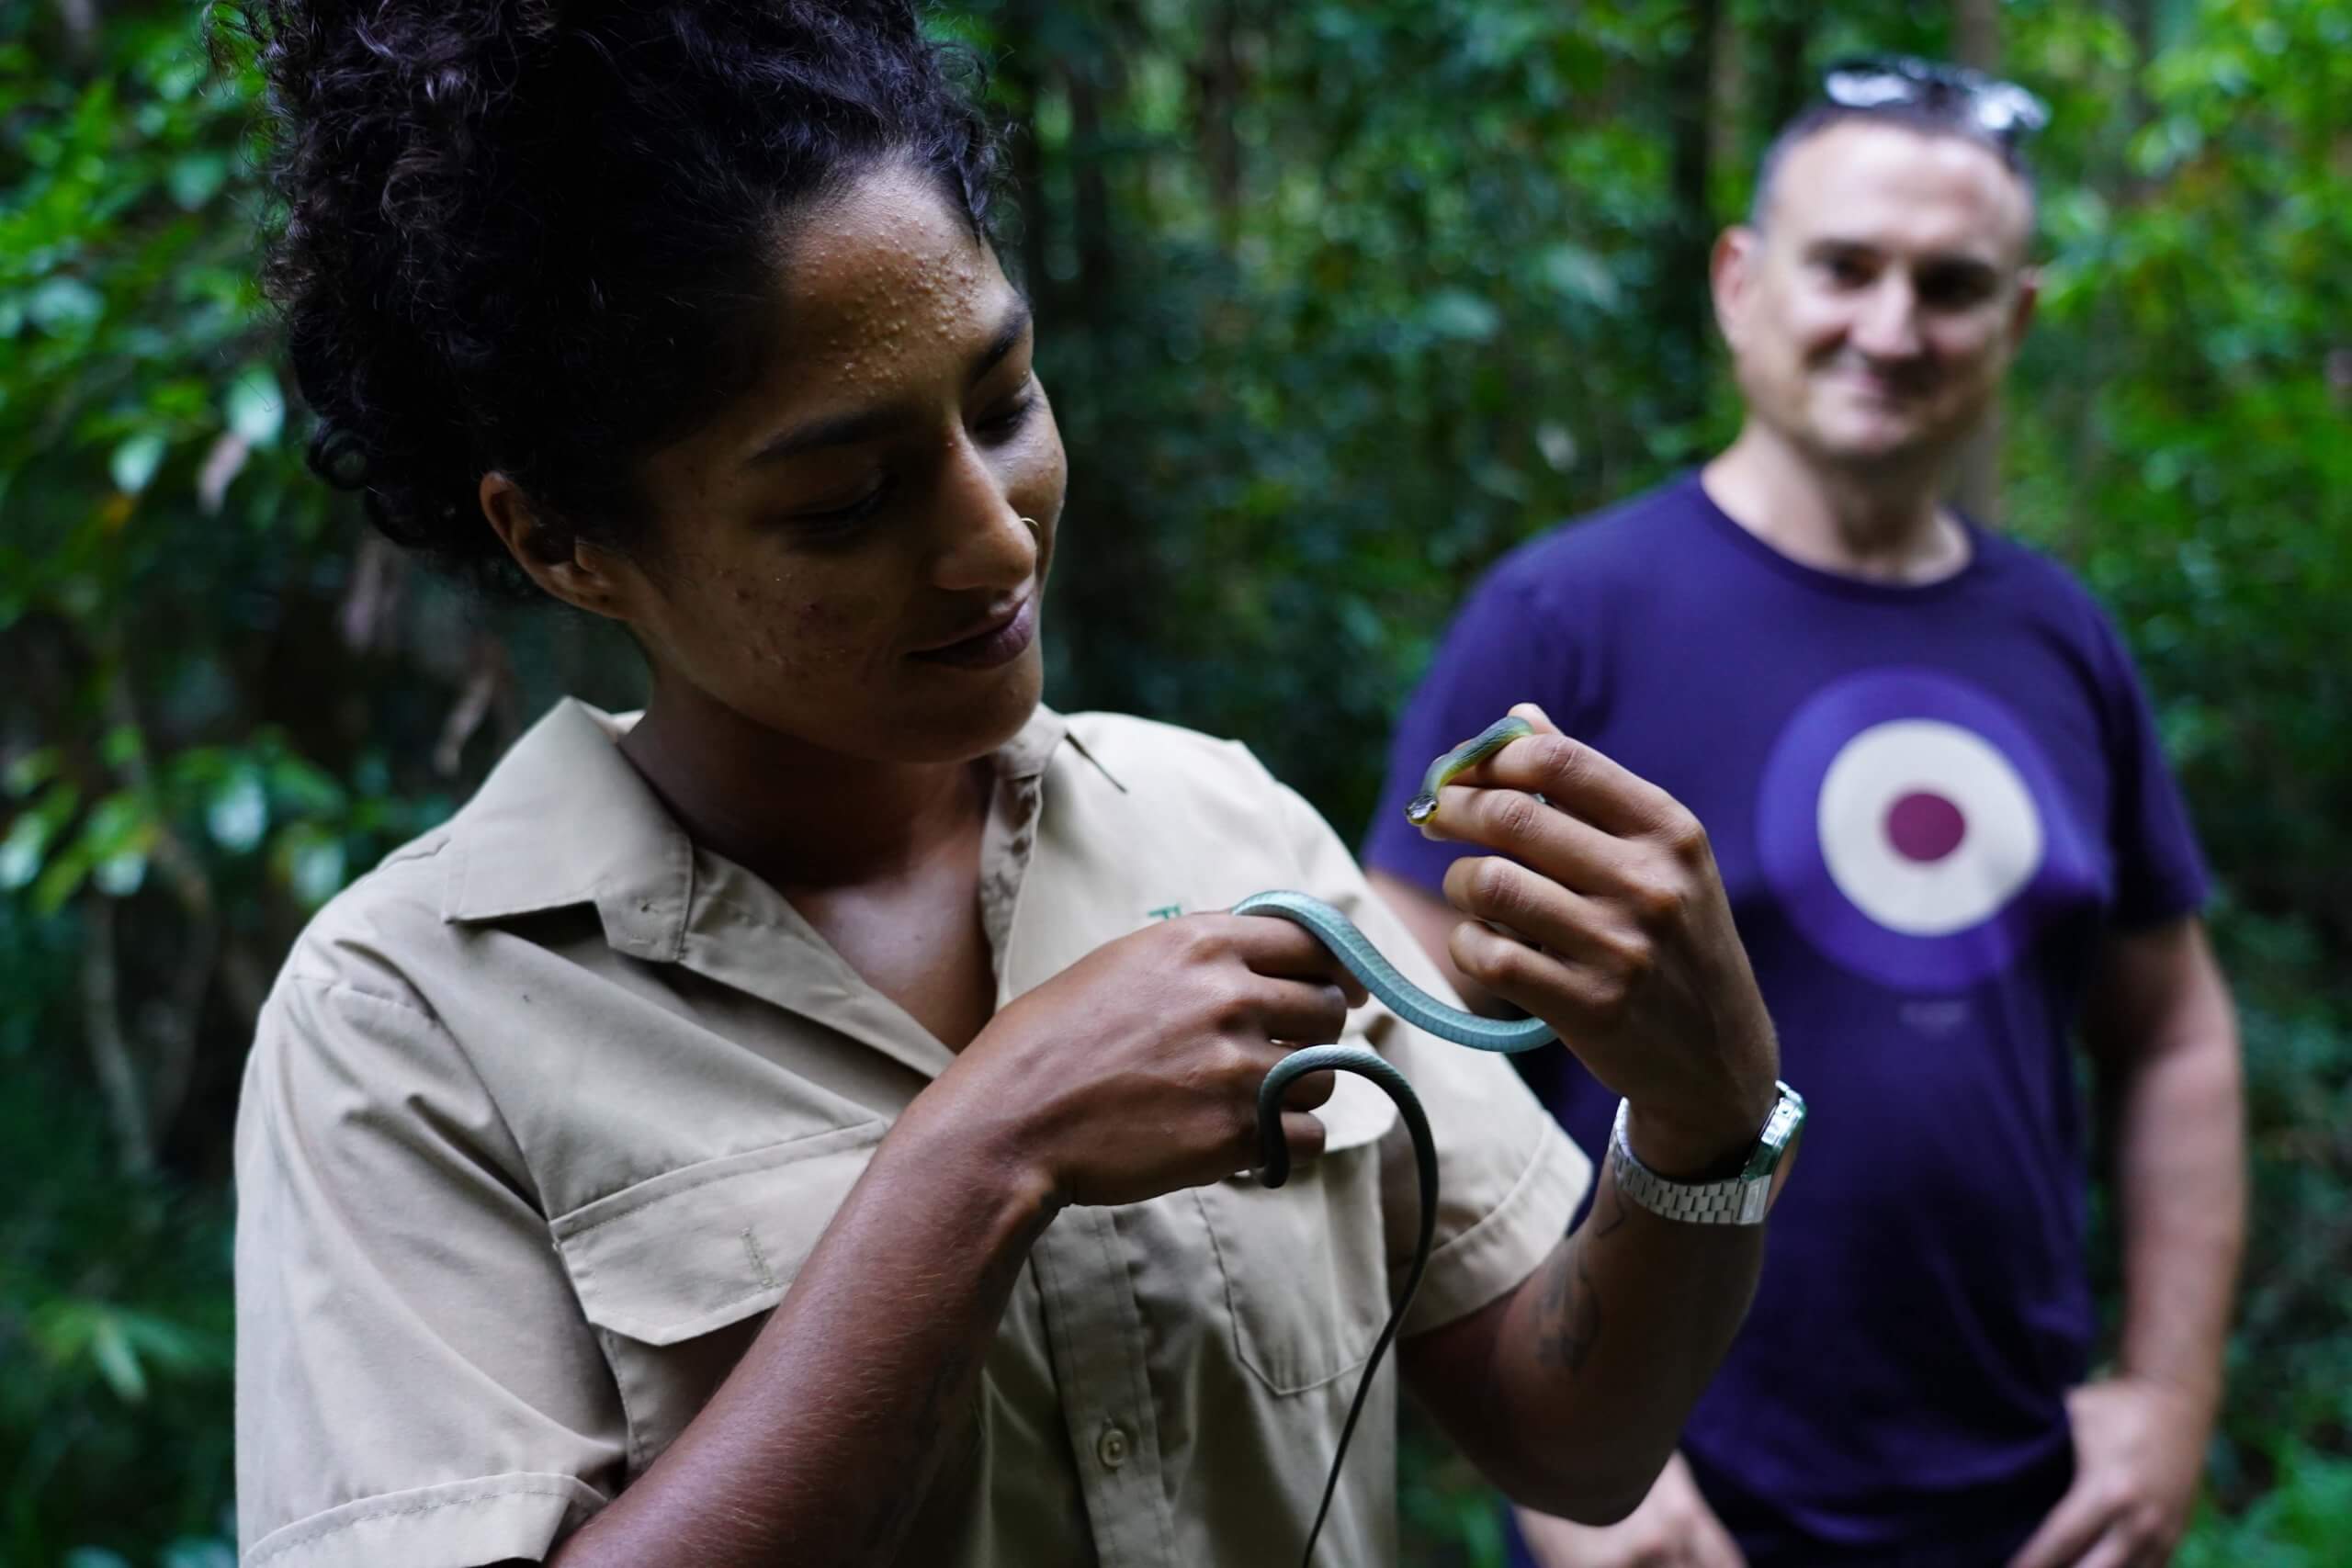 Lady holds tree snake with confidence on tour